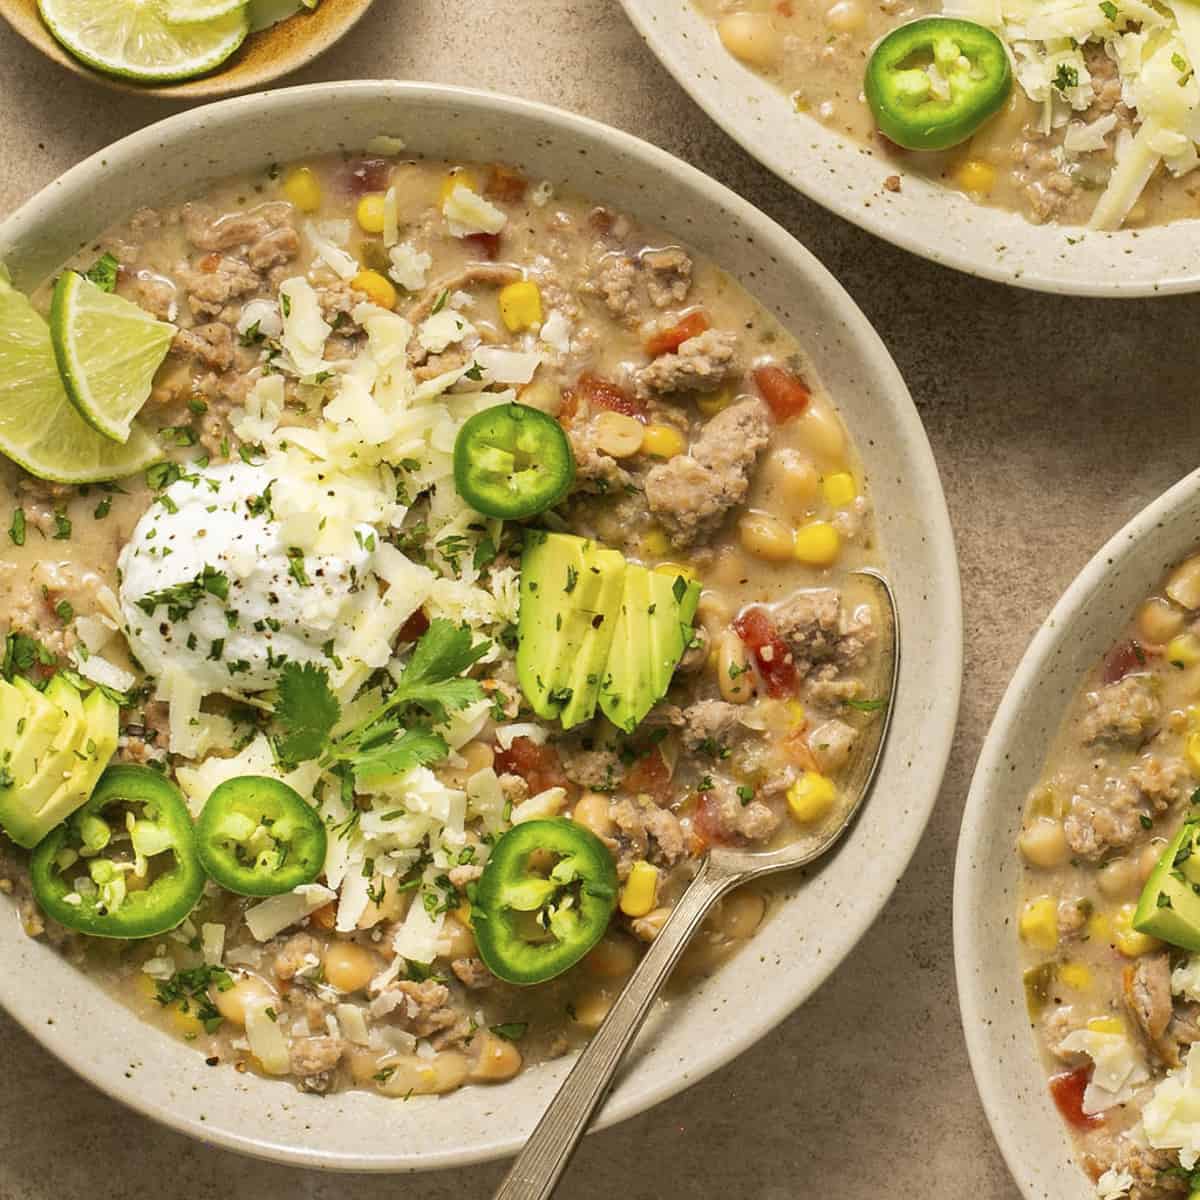 Turkey chili in a bowl with jalapenos, avocado and limes.